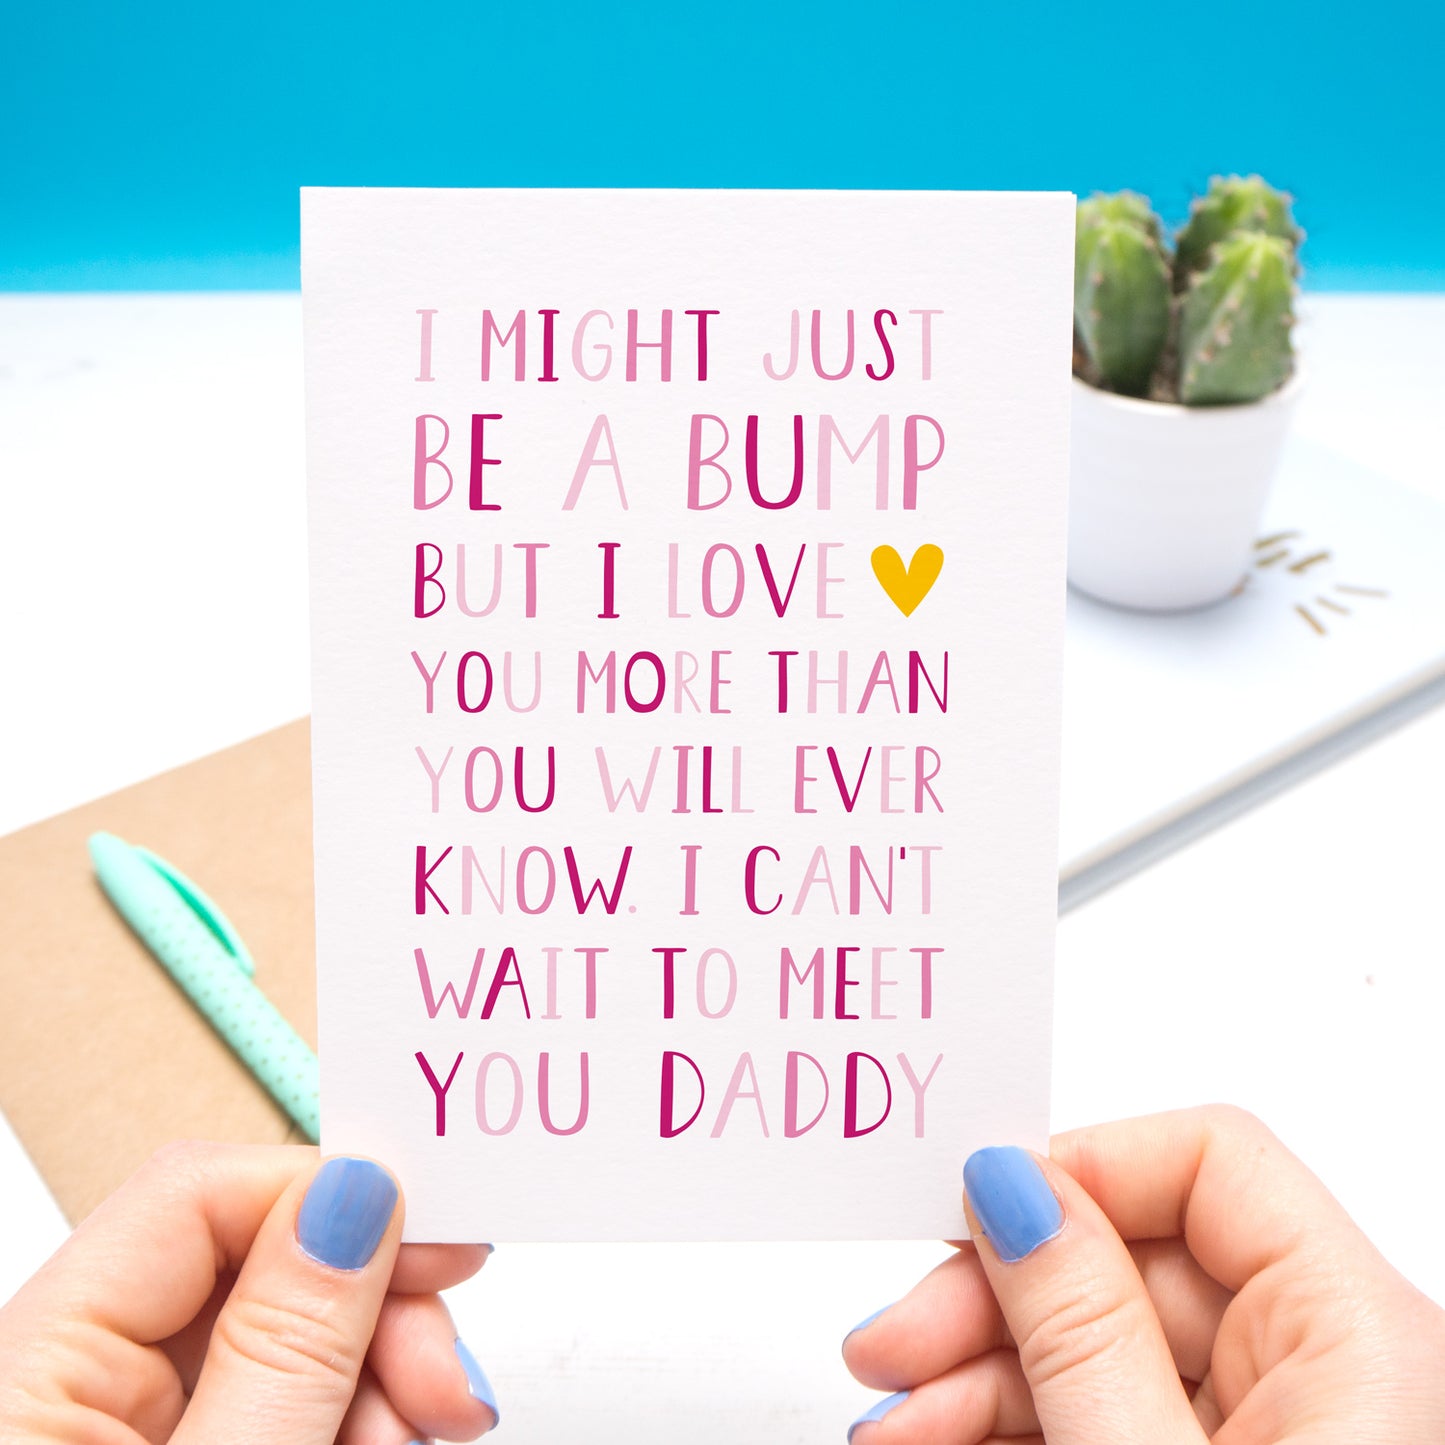 I might just be a bump but I love you more than you will ever know. I can't wait to meet you daddy - Typographic Father's day card in pink 